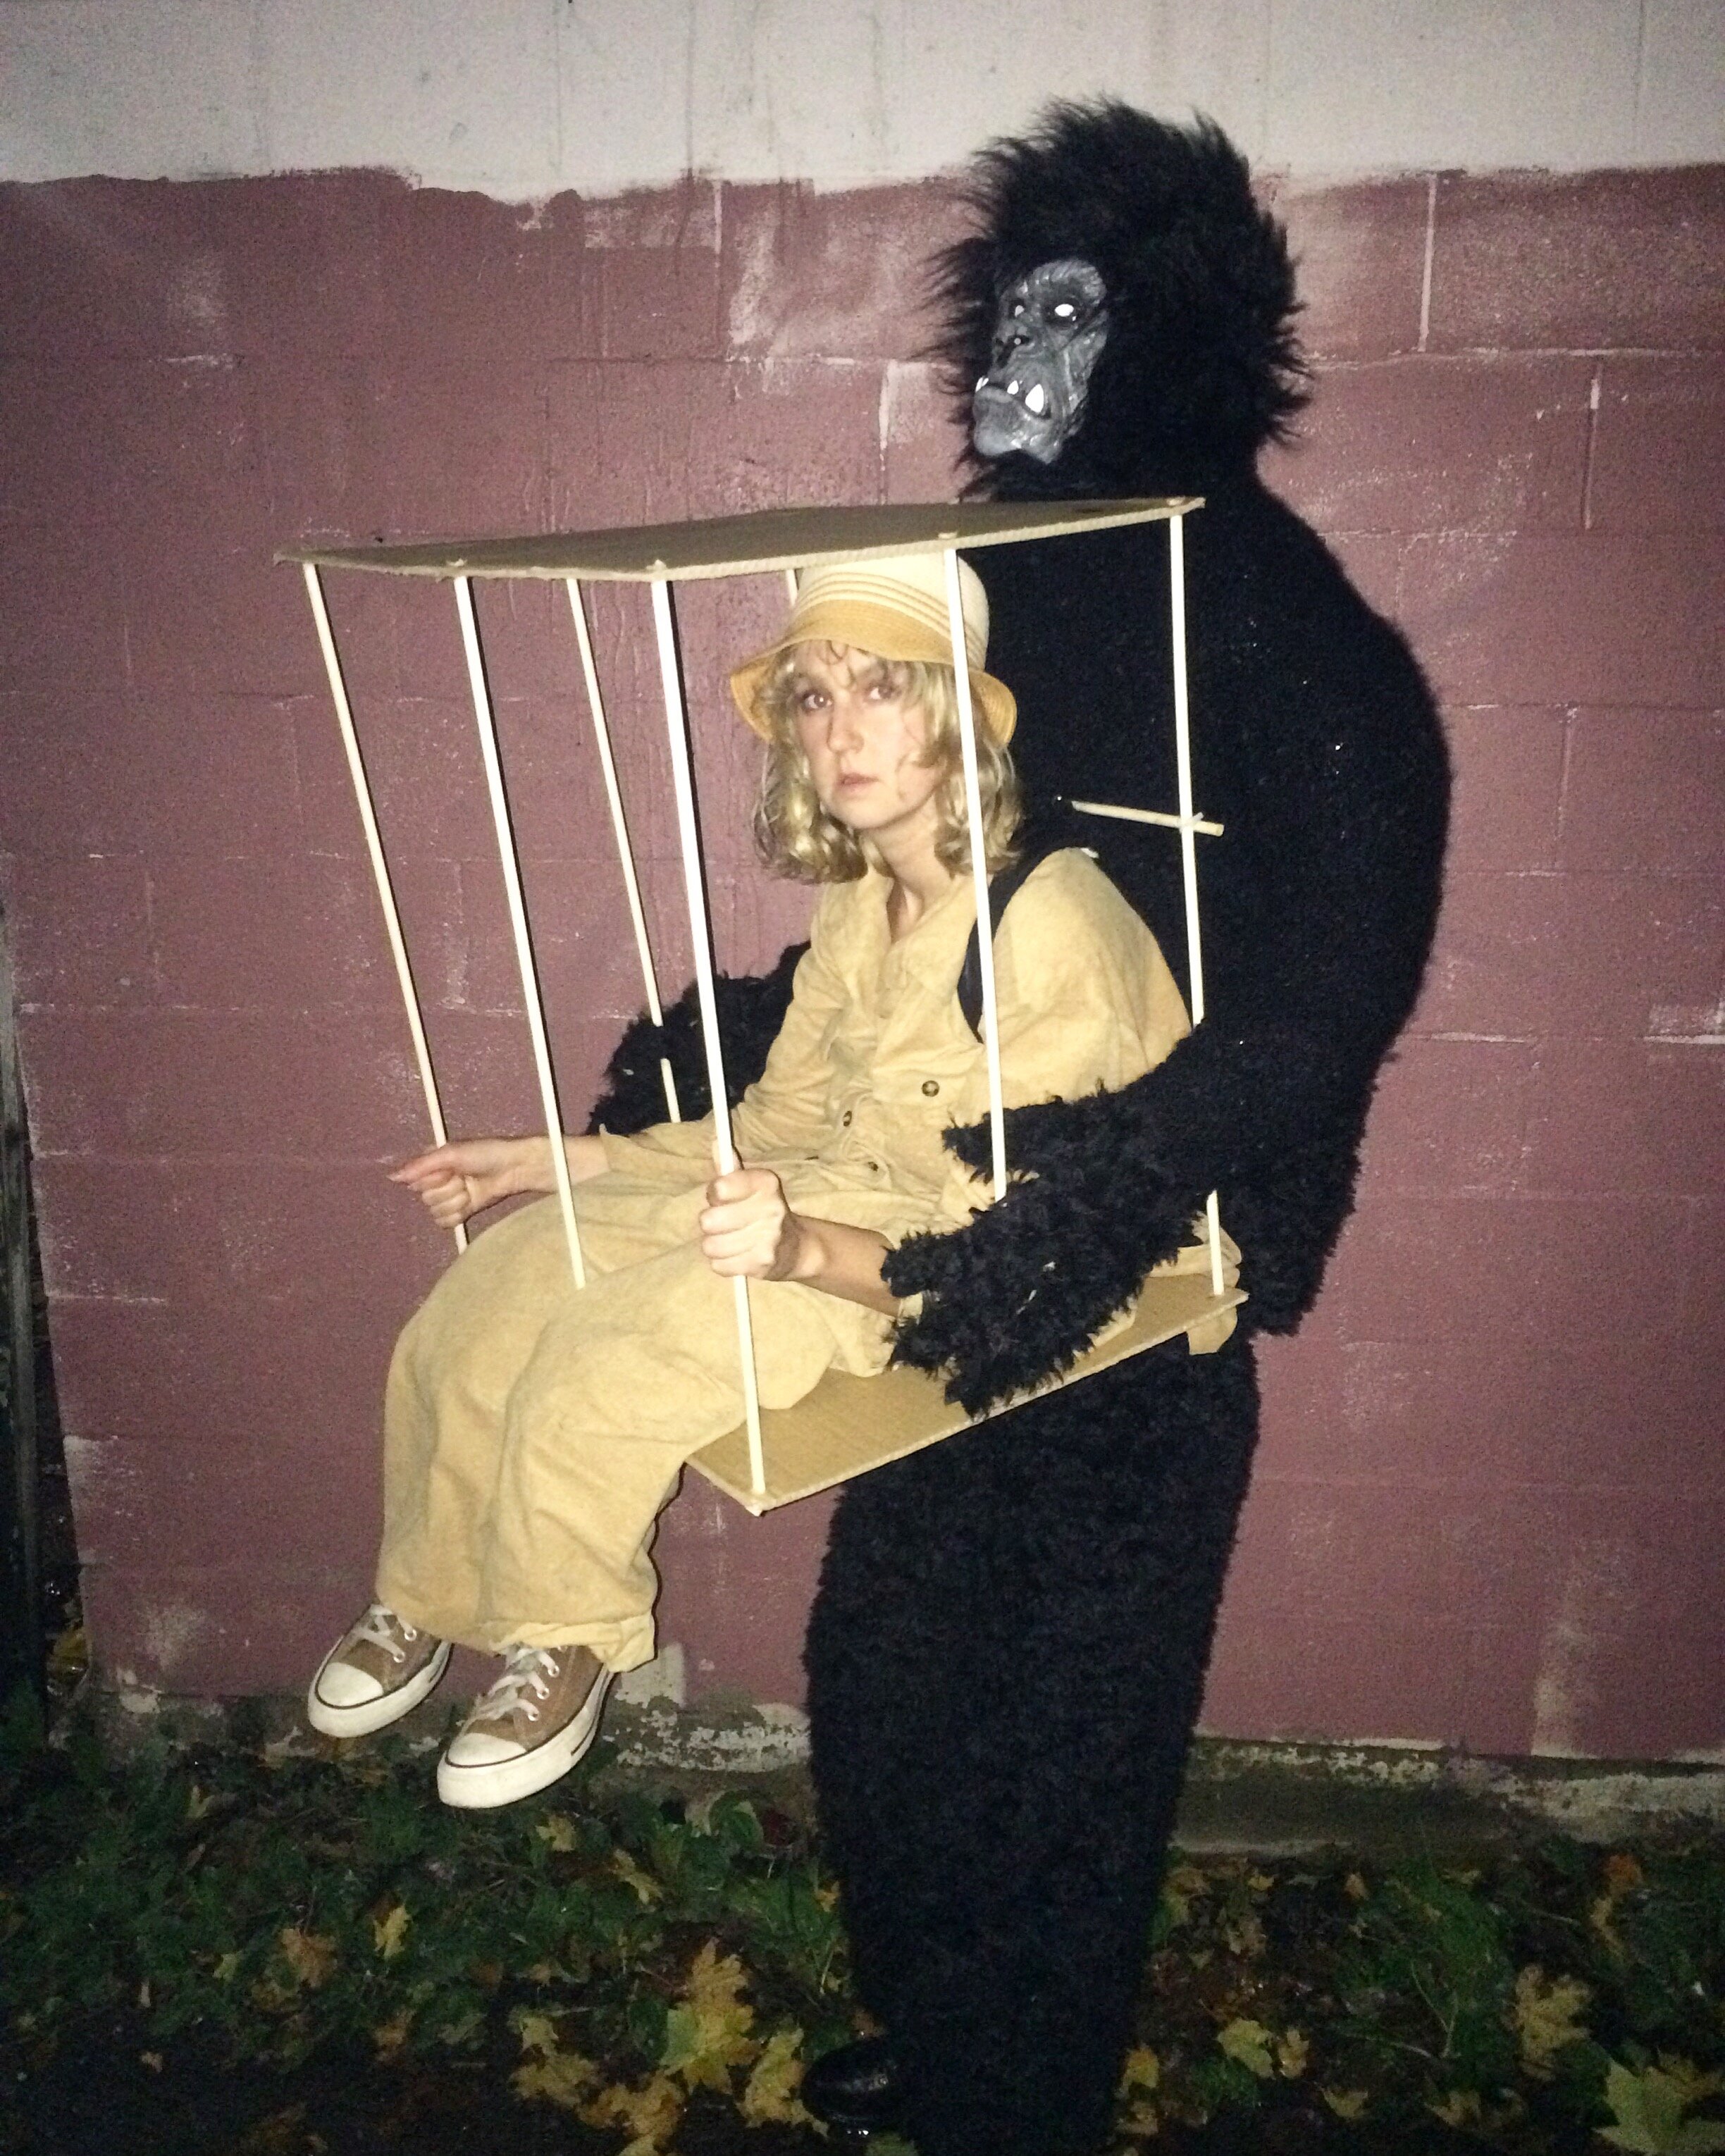  Gorilla holding caged zookeeper  2019 